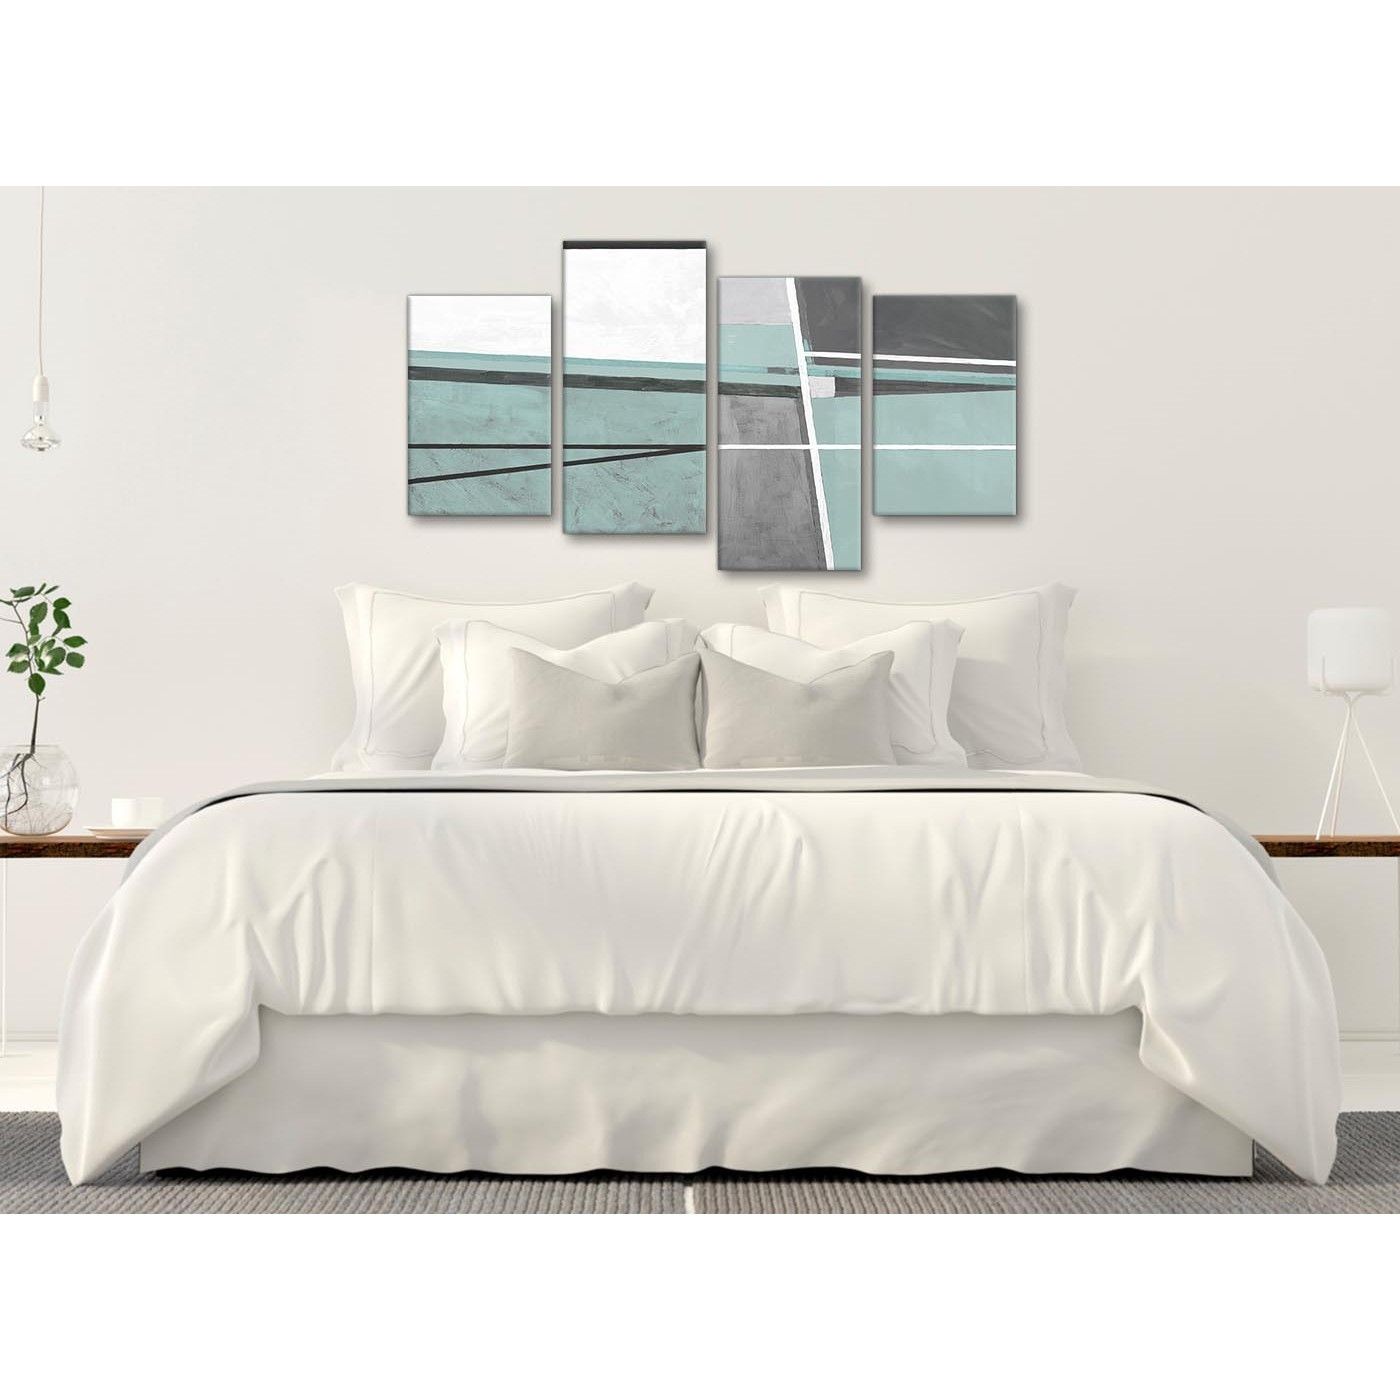 Large Duck Egg Blue Grey Painting Abstract Bedroom Canvas Pictures For Most Up To Date Duck Egg Blue Canvas Wall Art (View 12 of 15)